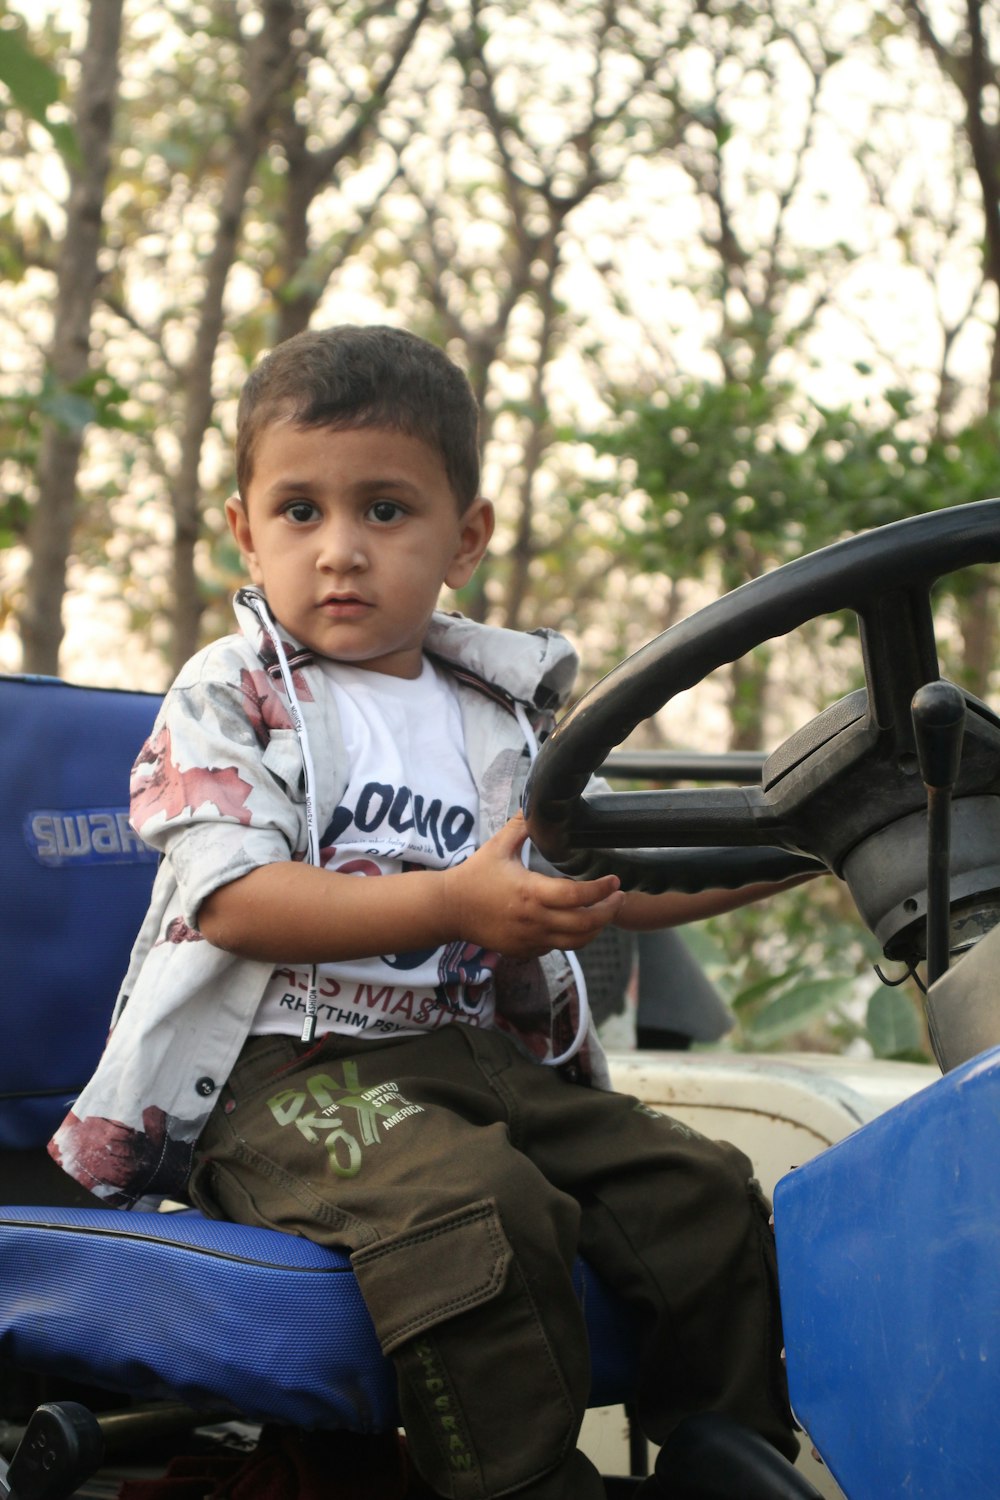 a young boy sitting on the back of a blue vehicle